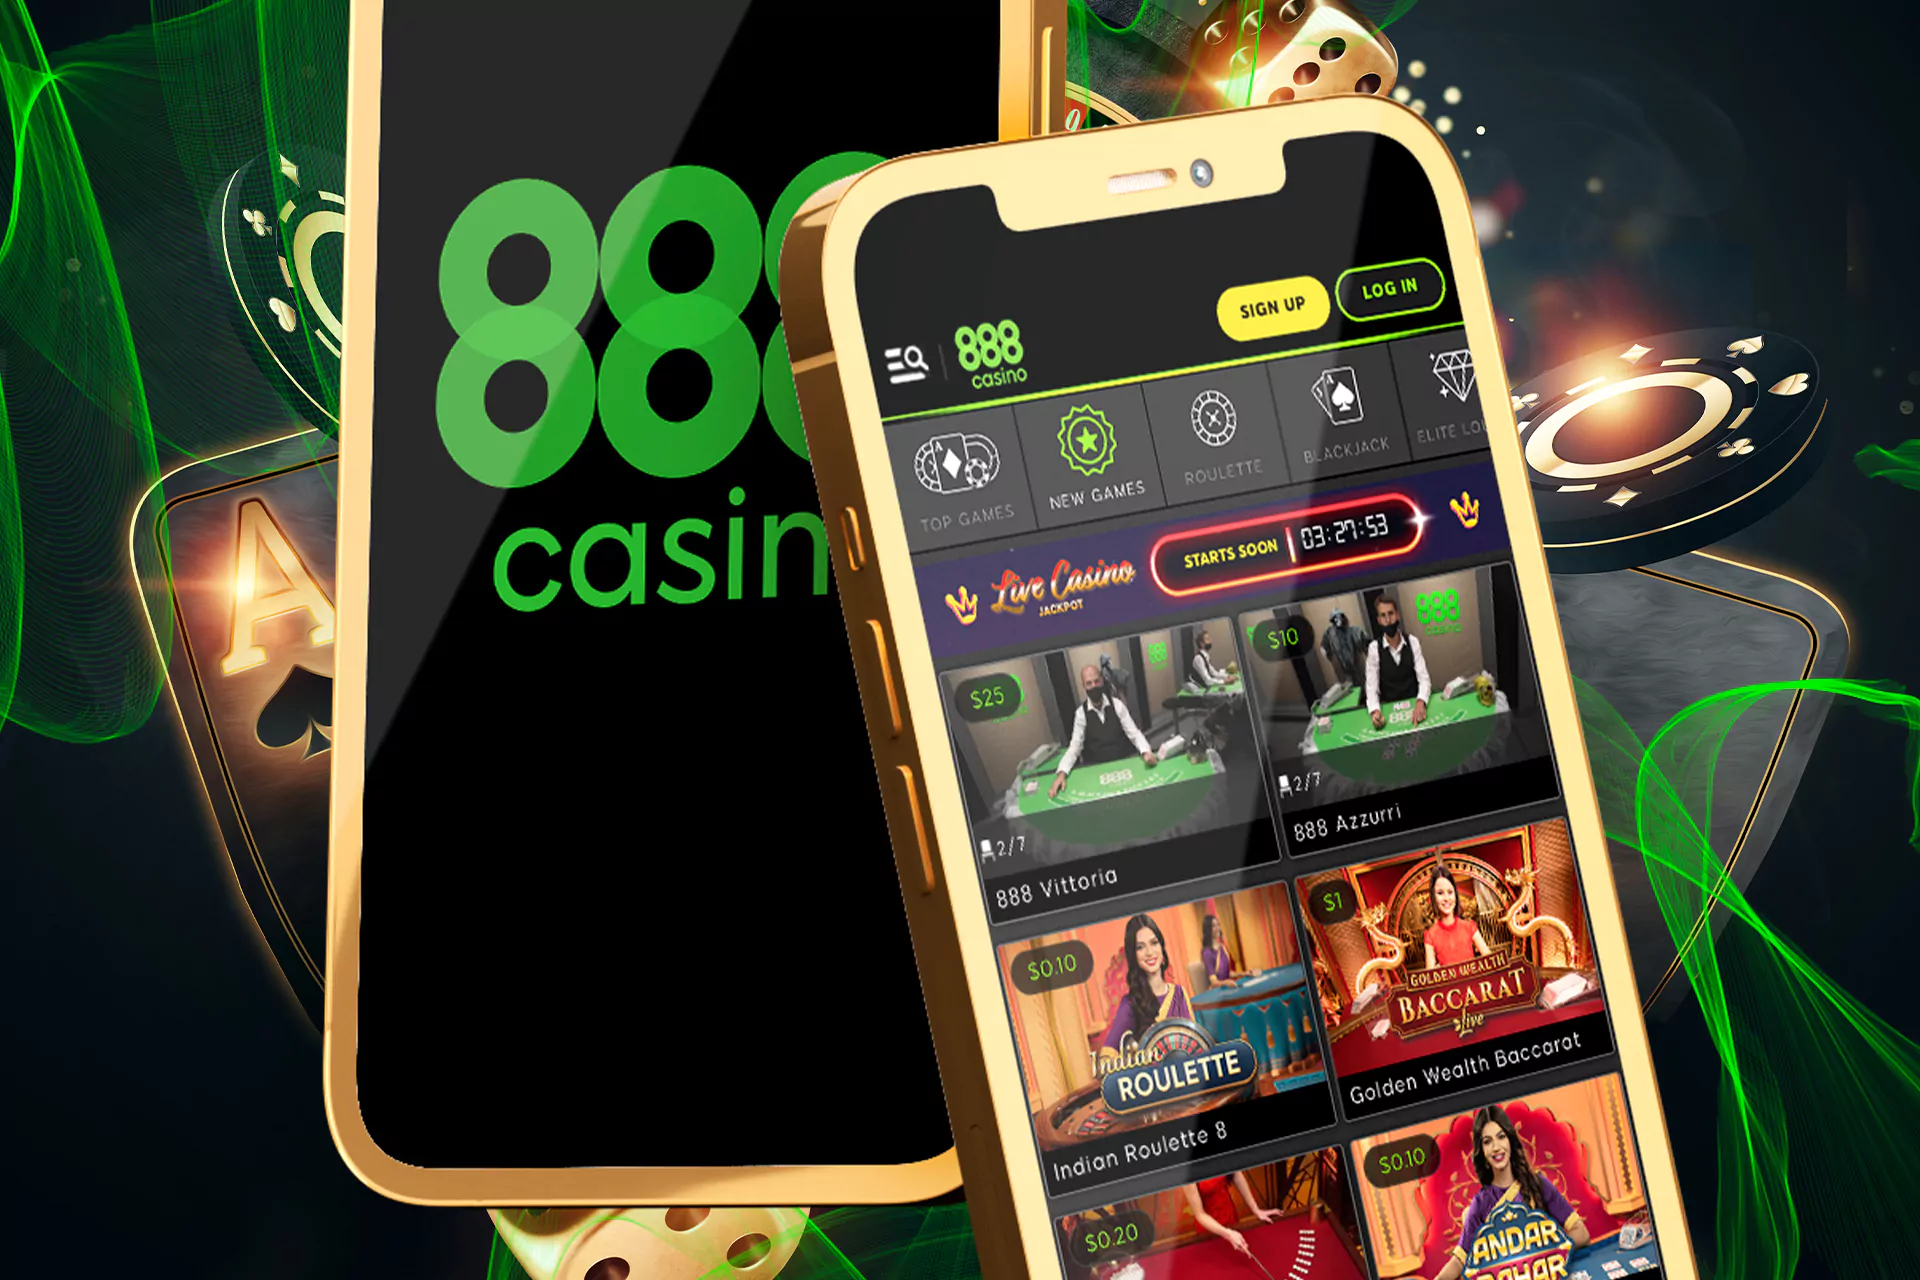 You can try nre games in the casino app.